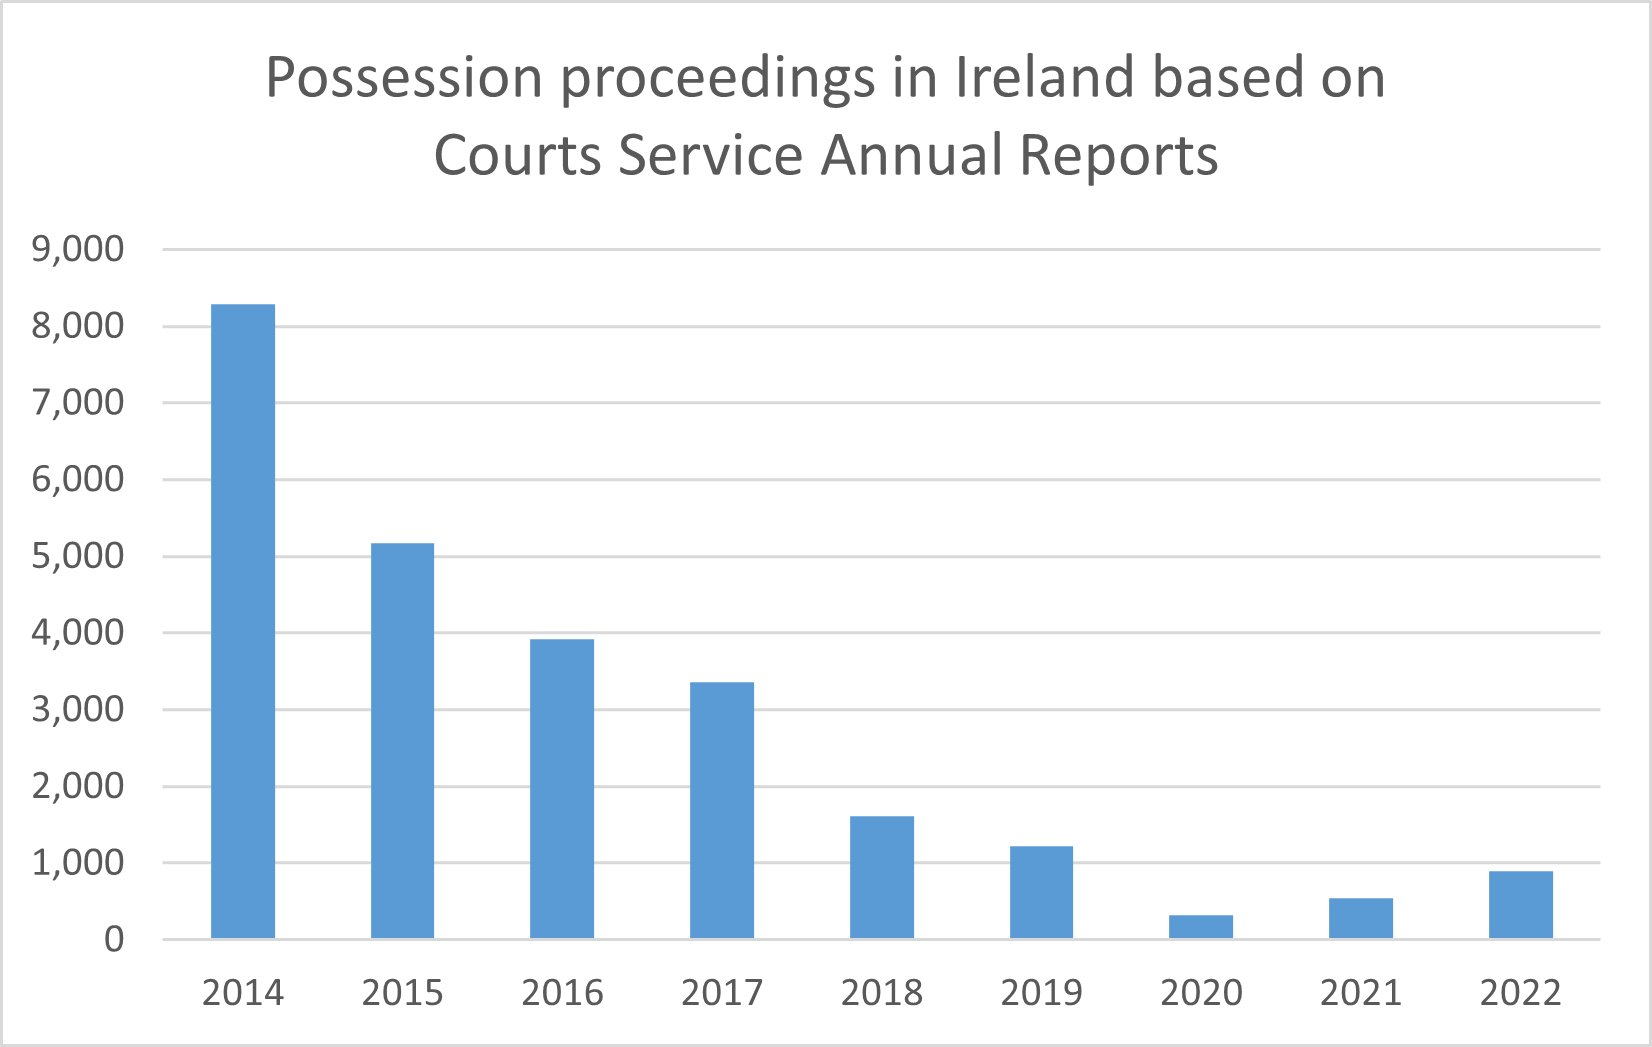 Possession proceedings in Ireland based on Court Service Annual Reports